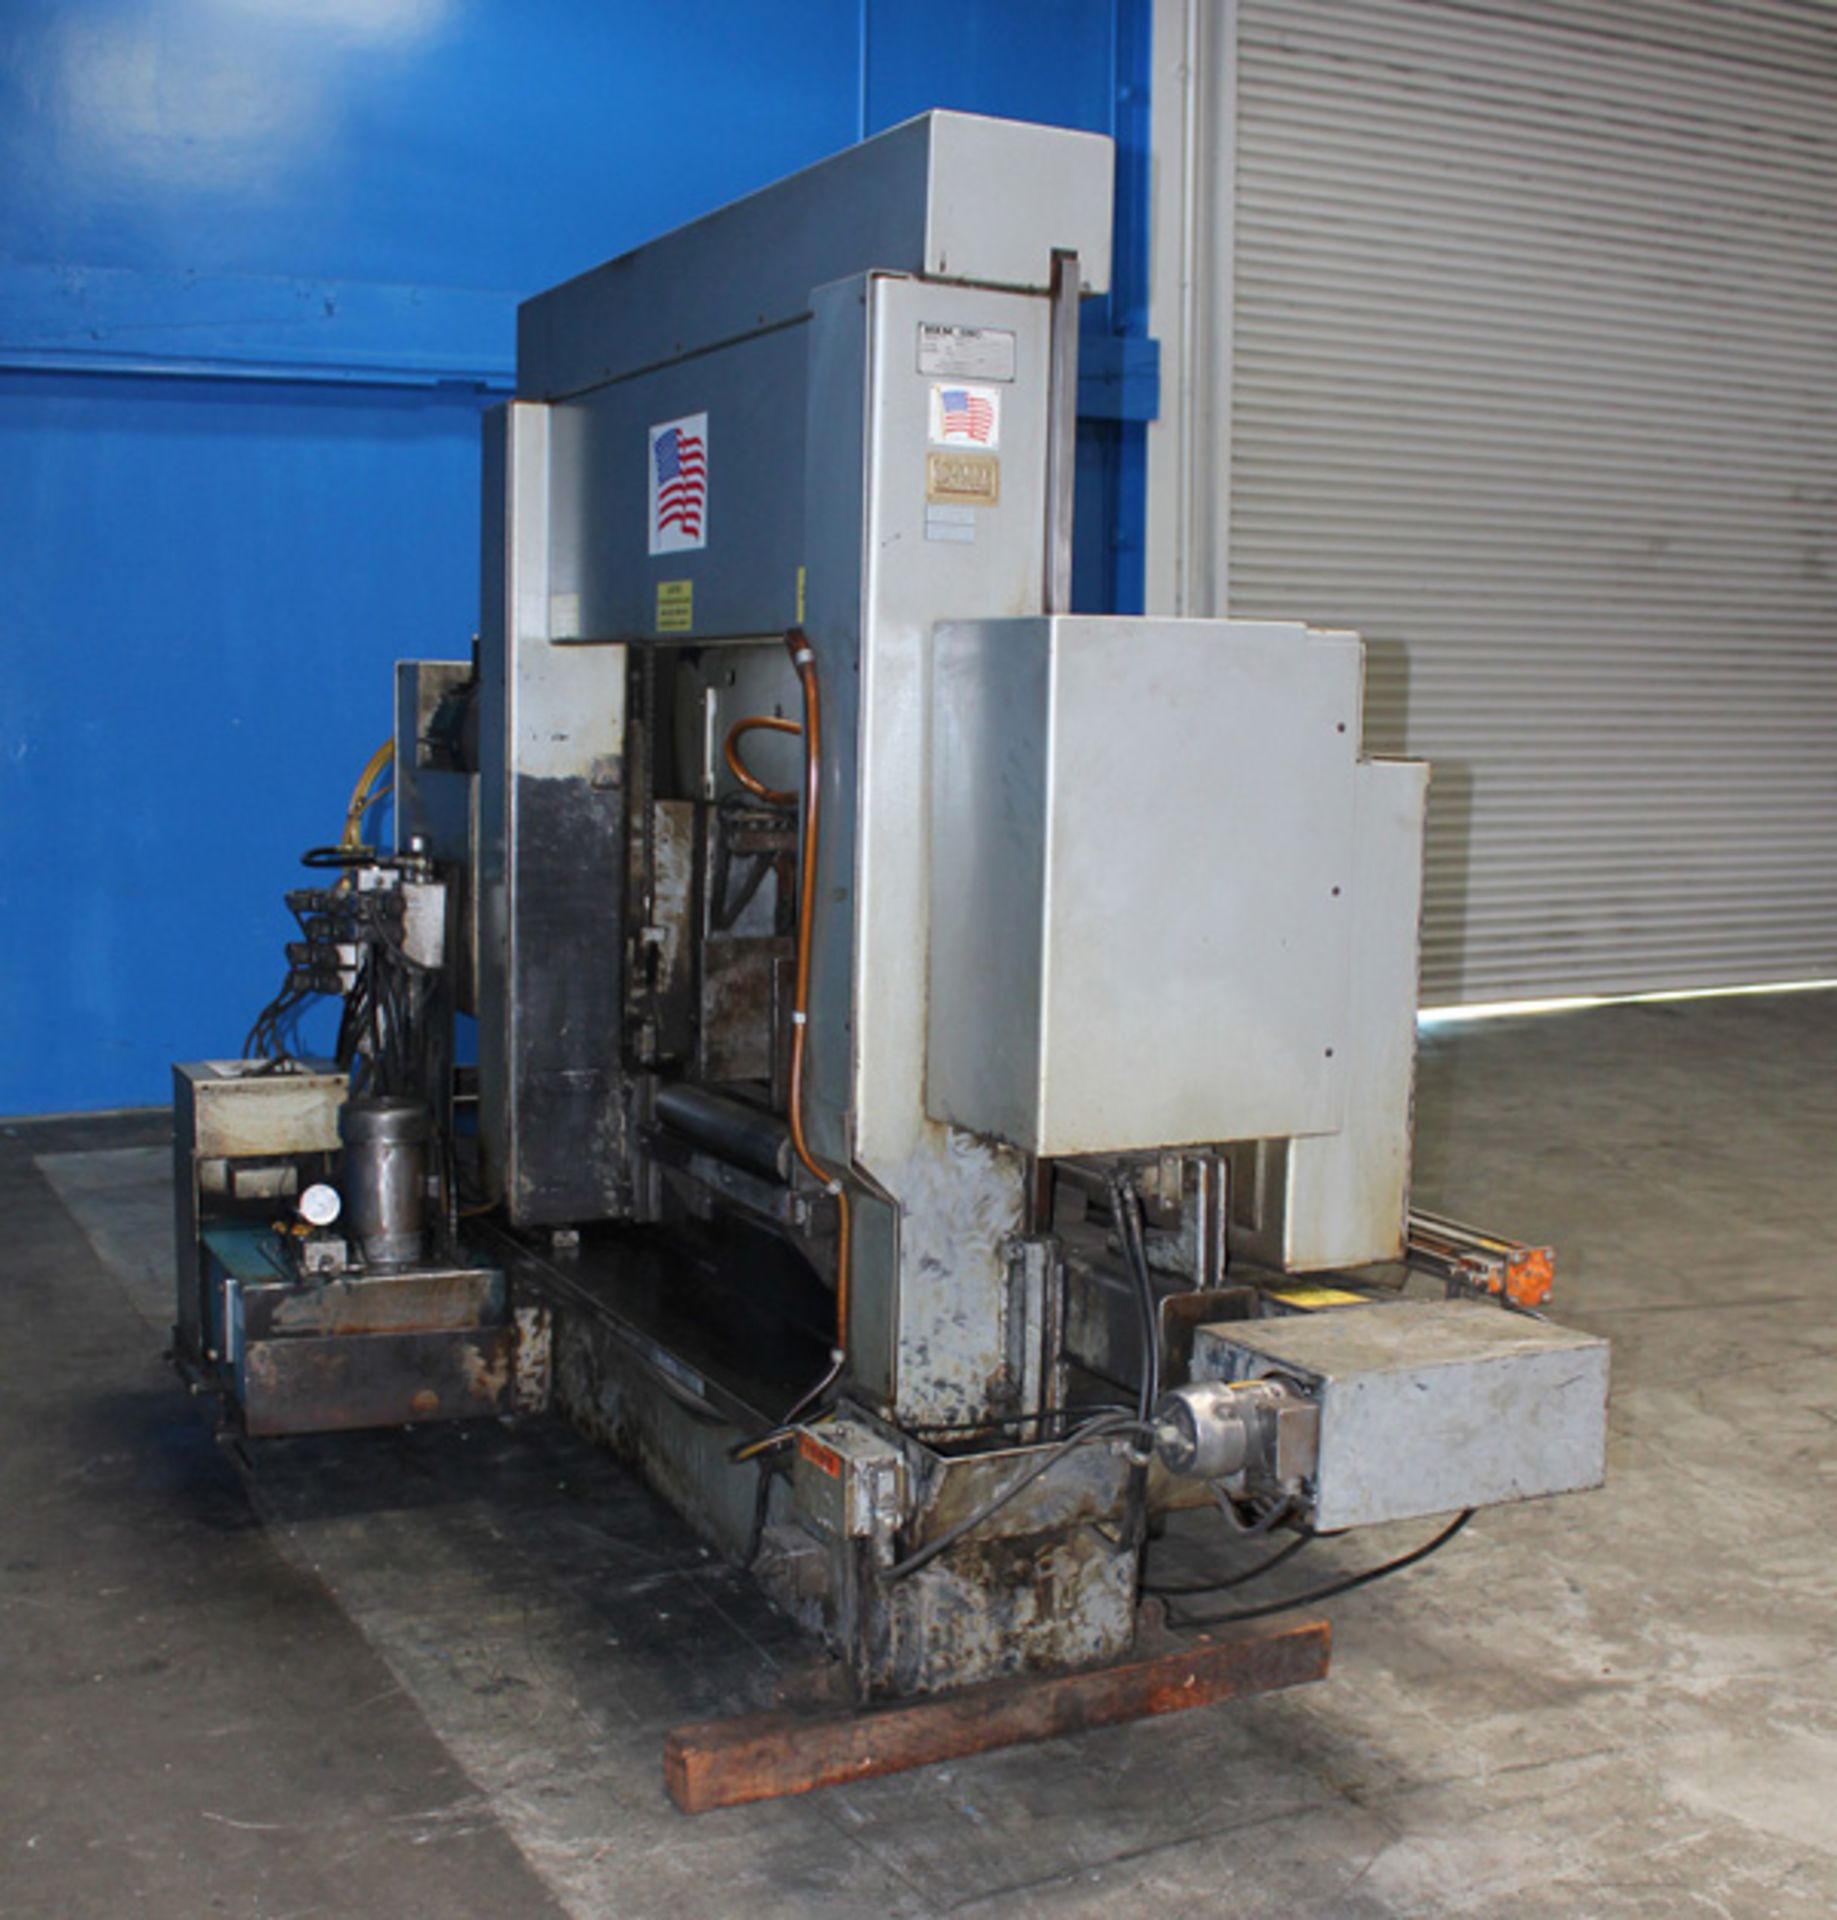 1996 HEM Semi-Automatic Horizontal Bandsaw, 18" x 20", Mdl: H130 HM- DC, S/N: 524196, Located In: - Image 4 of 8